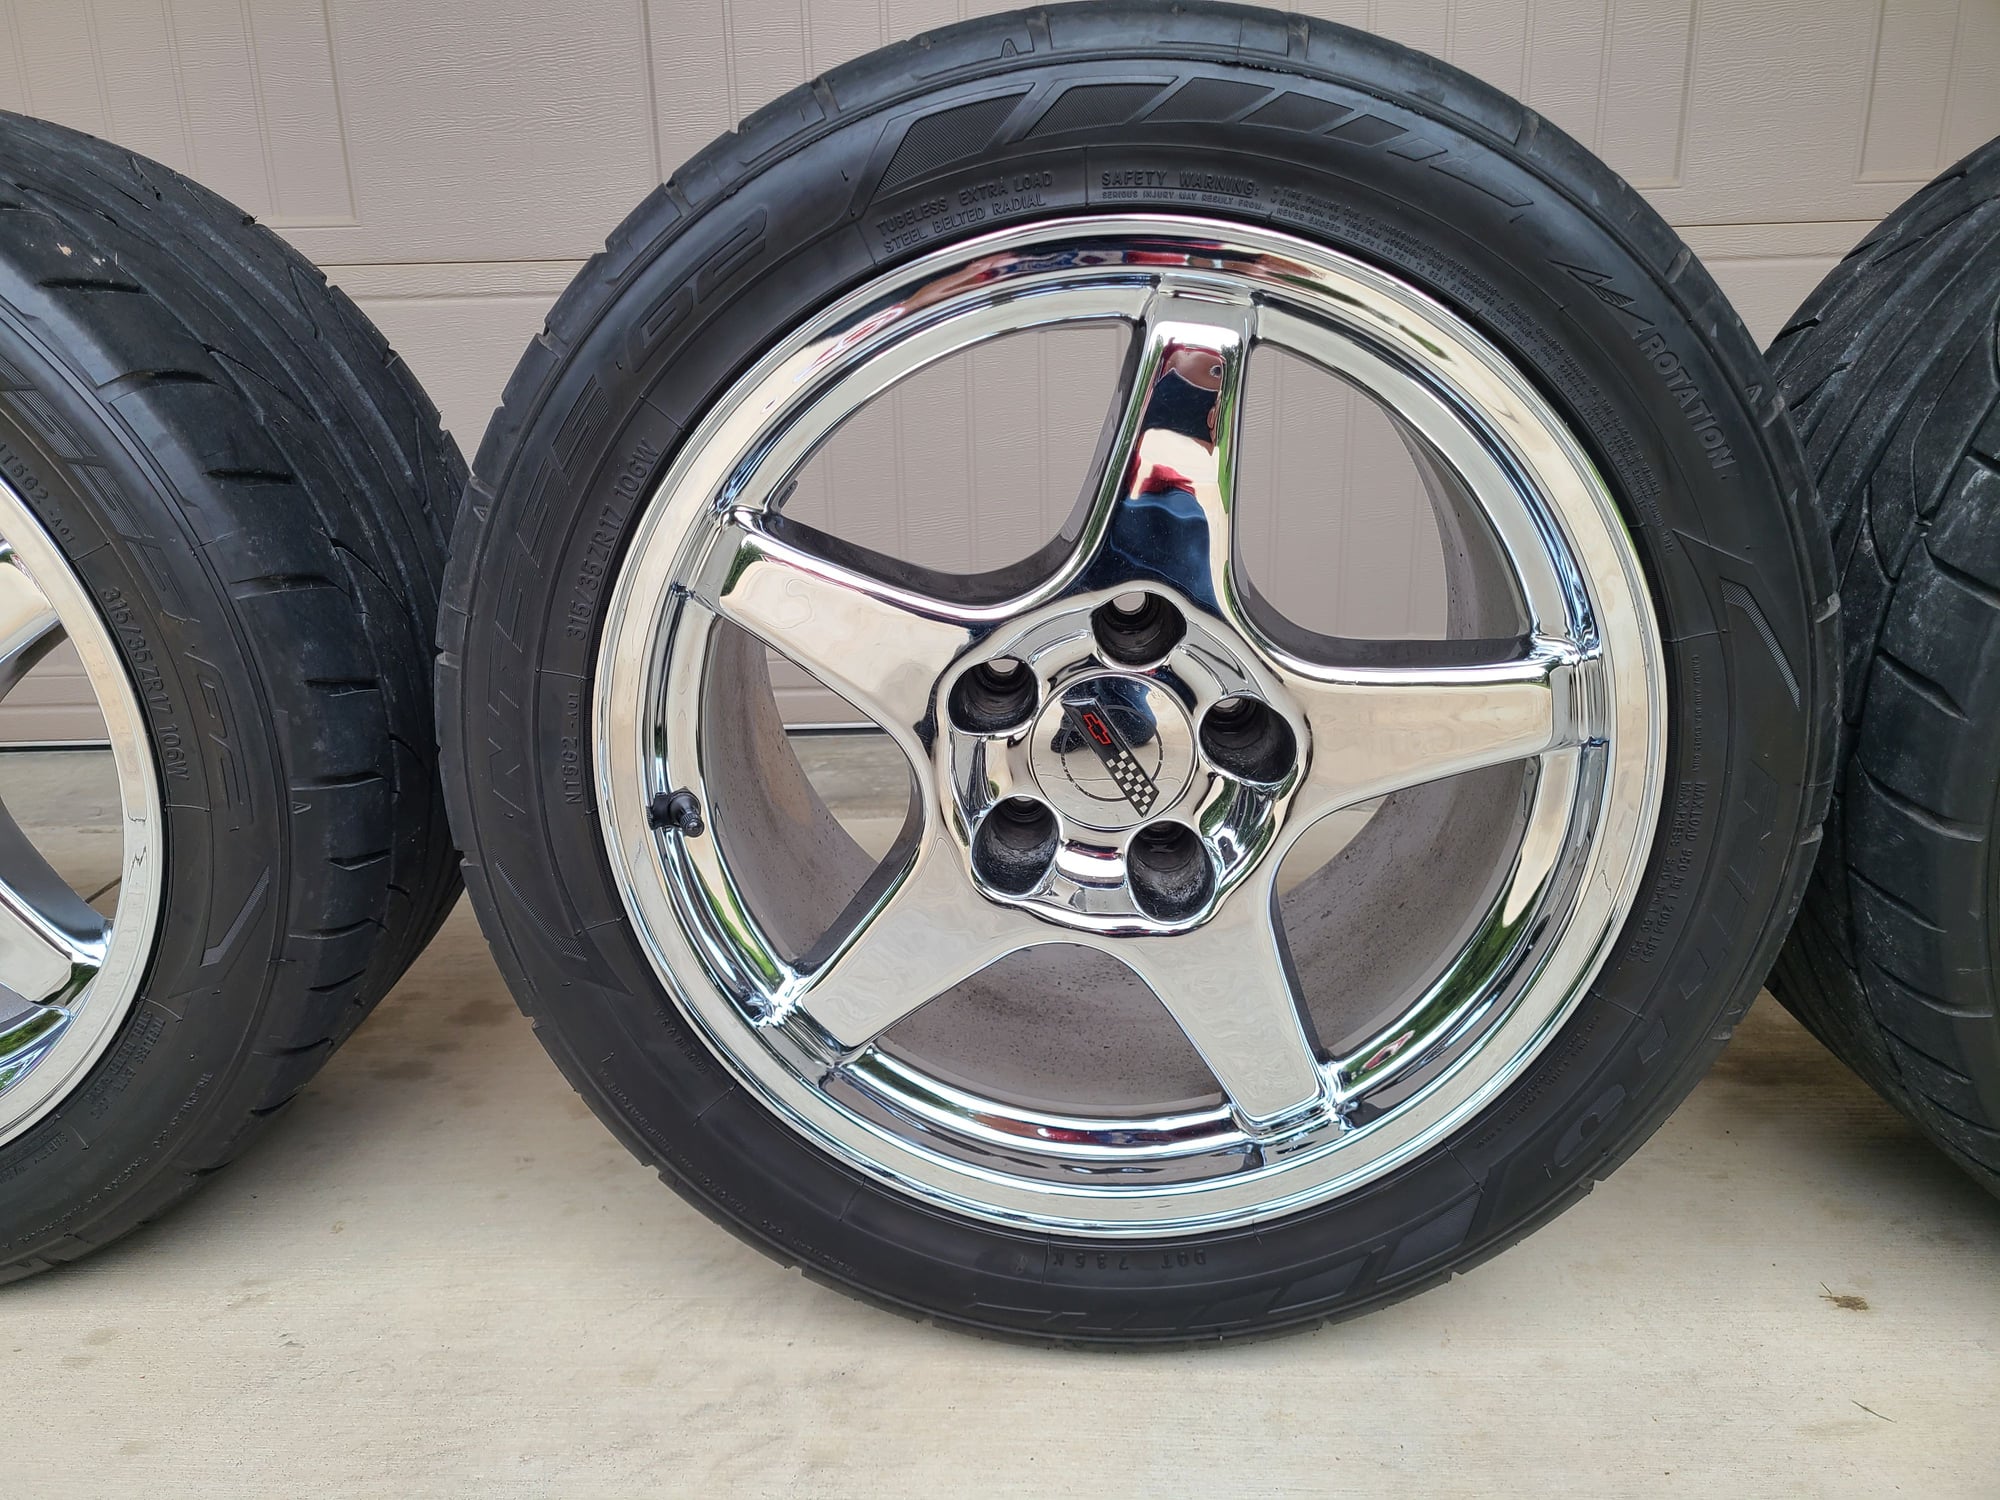 Wheels and Tires/Axles - 6 Wheels 17x11, Corvette ZR1 replica, 4 tires 315-35-17, fits 4th gen Firebird - Used - All Years  All Models - Springfield, MO 65804, United States